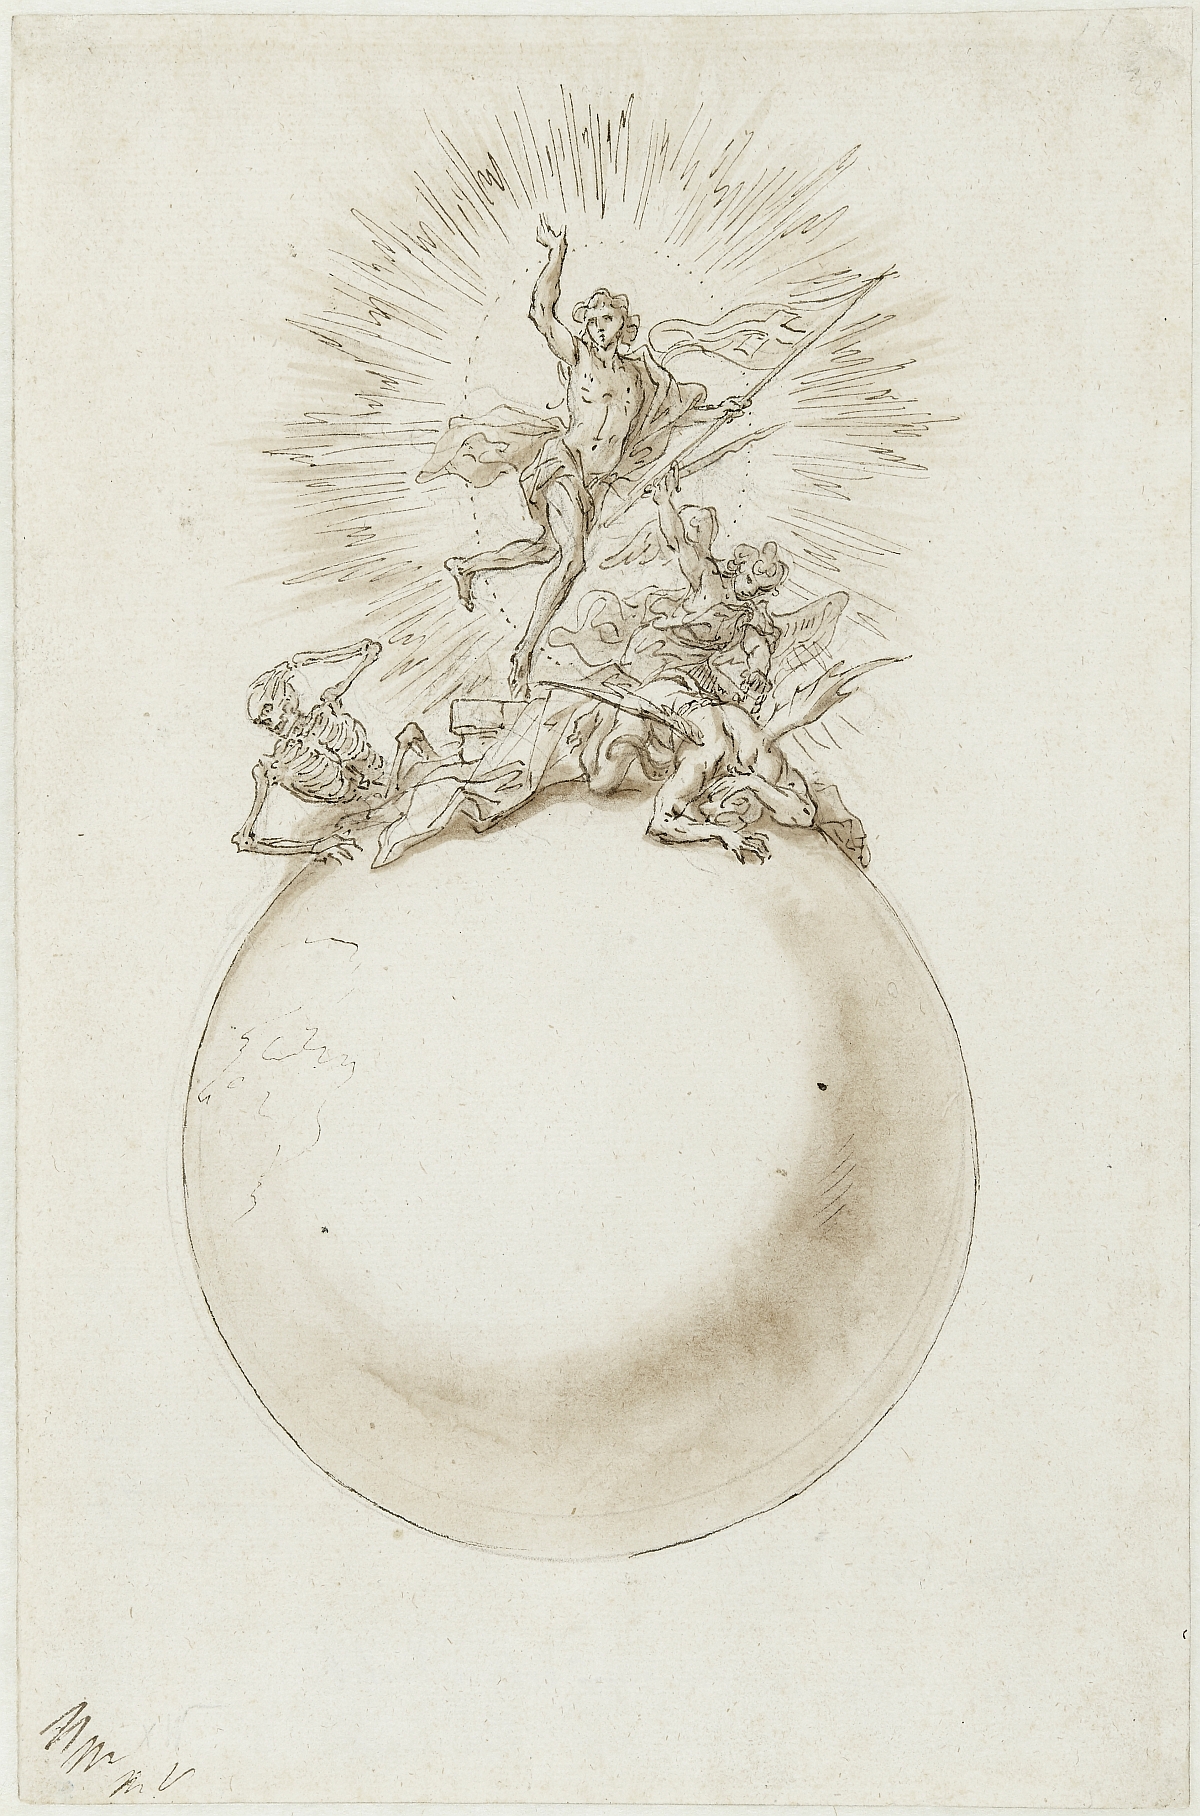 Christus as Victor over Death and Hell, Martino Altomonte, pen and bistre over lead stylus, brown wash on paper, inv. no. RO 1080; design for the tabernacle crown of the Christ Altar in the Trinity Chapel of Stadl-Paura near Lambach, 1723